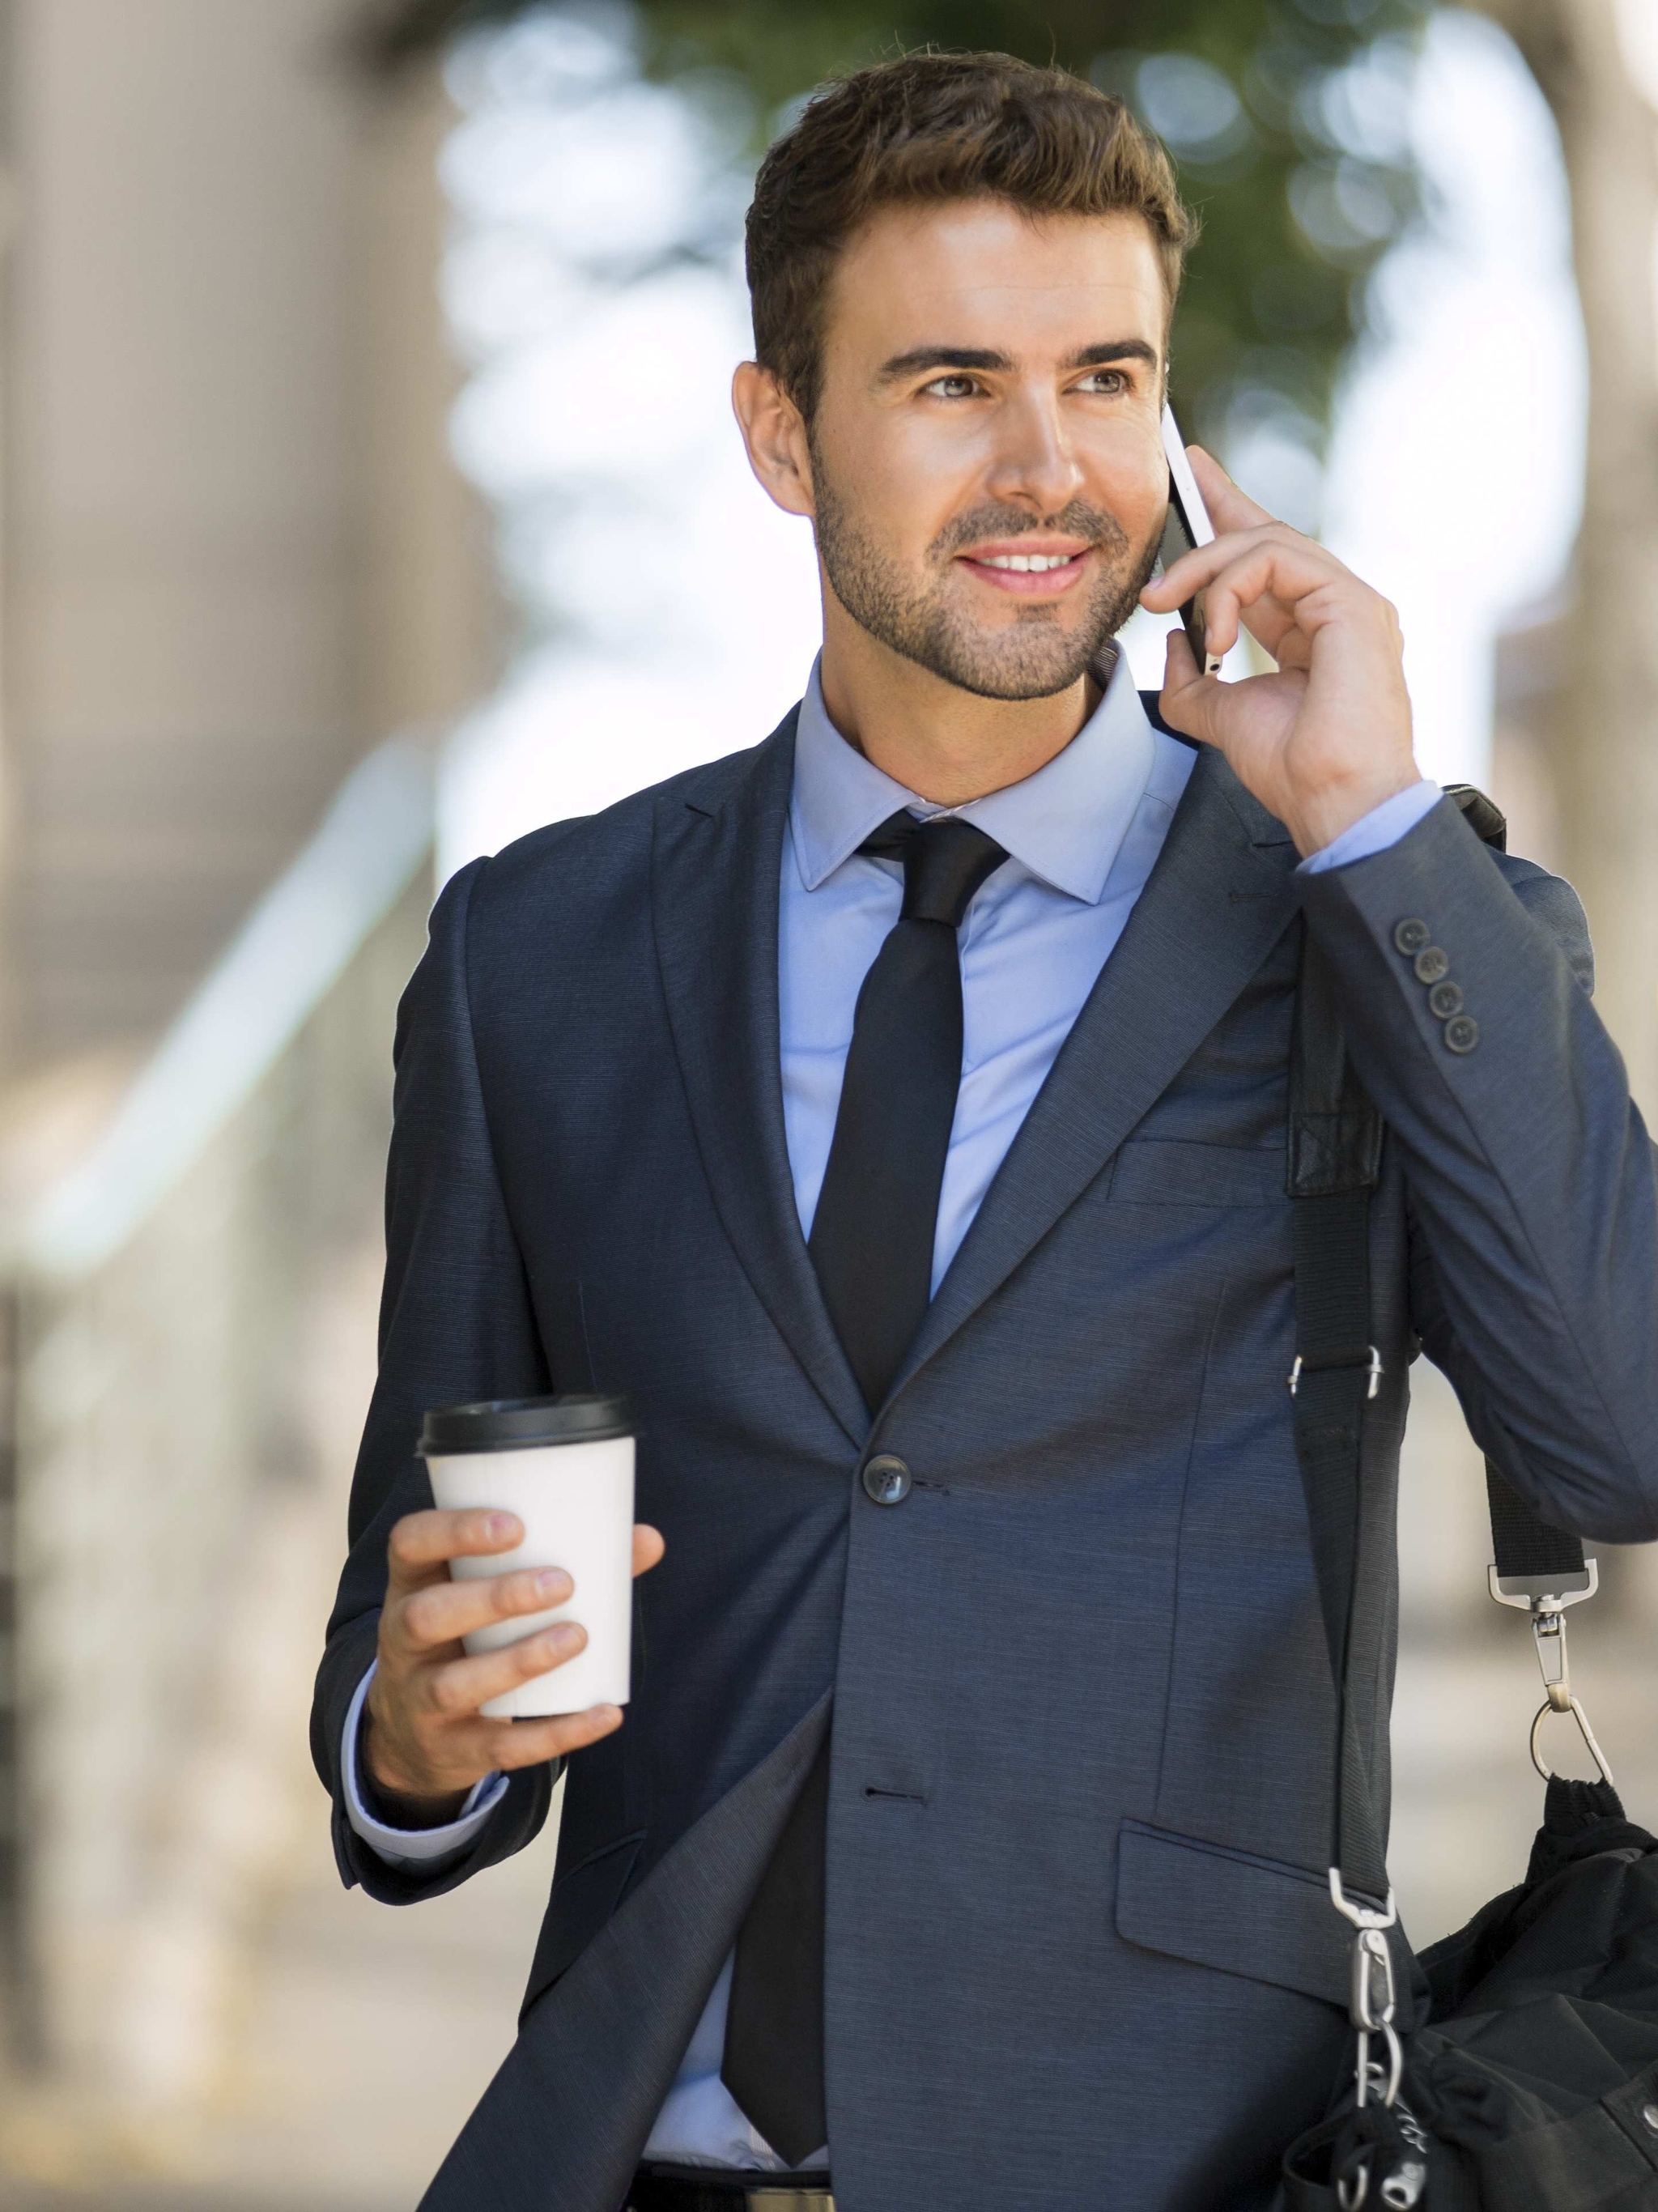 Image: Male, guy, face, smile, phone, style, suit, coat, coffee сup, street